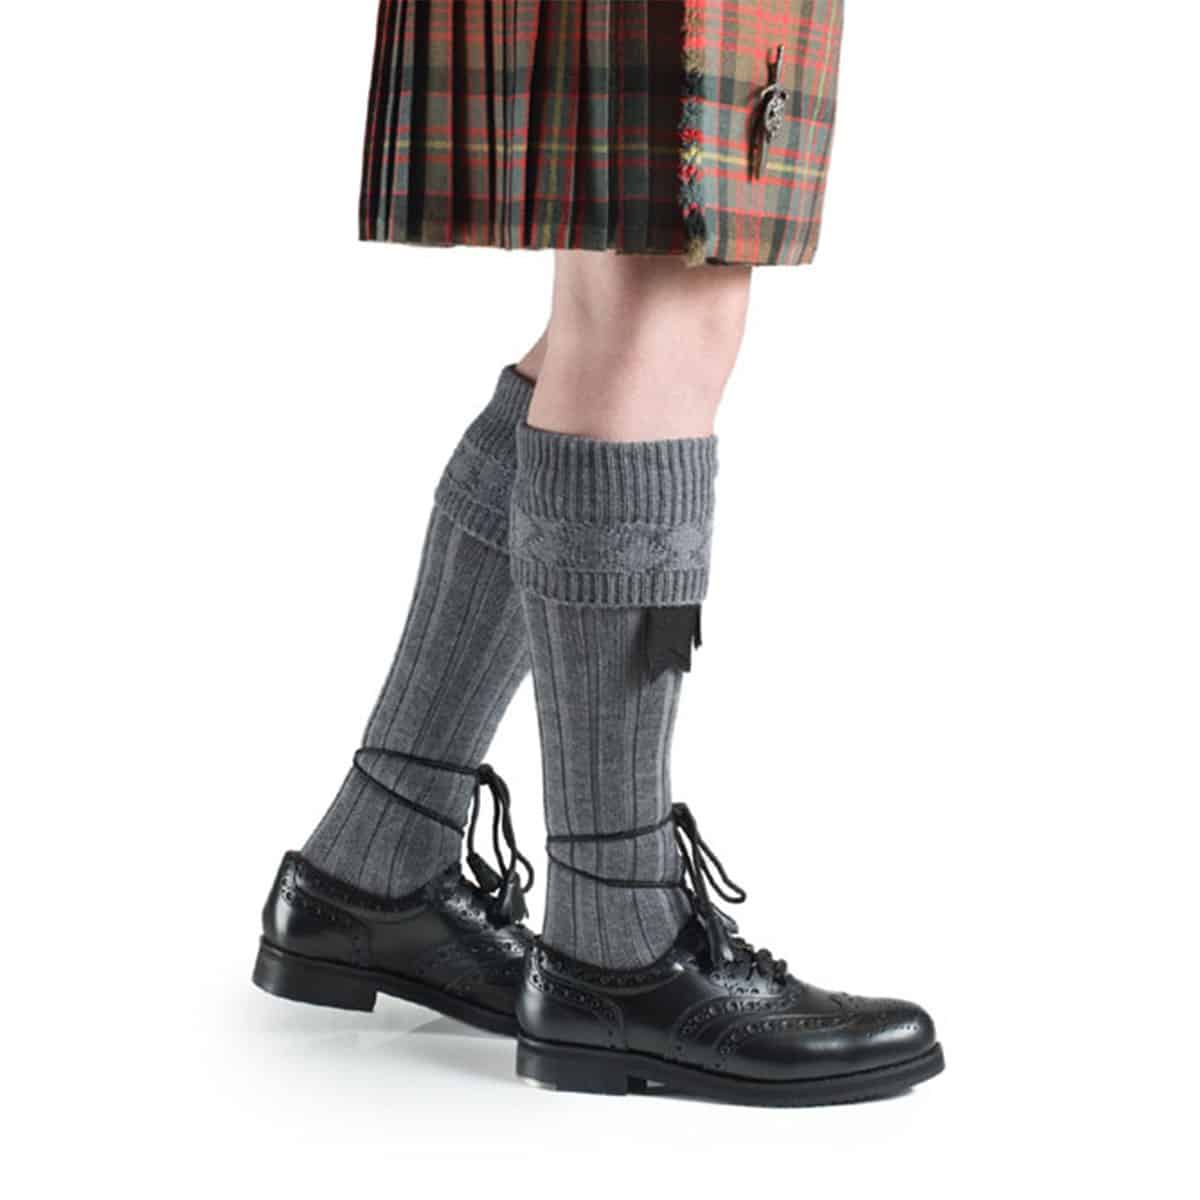 A person wearing a kilt and the Quality Wool Blend Kilt Hose.